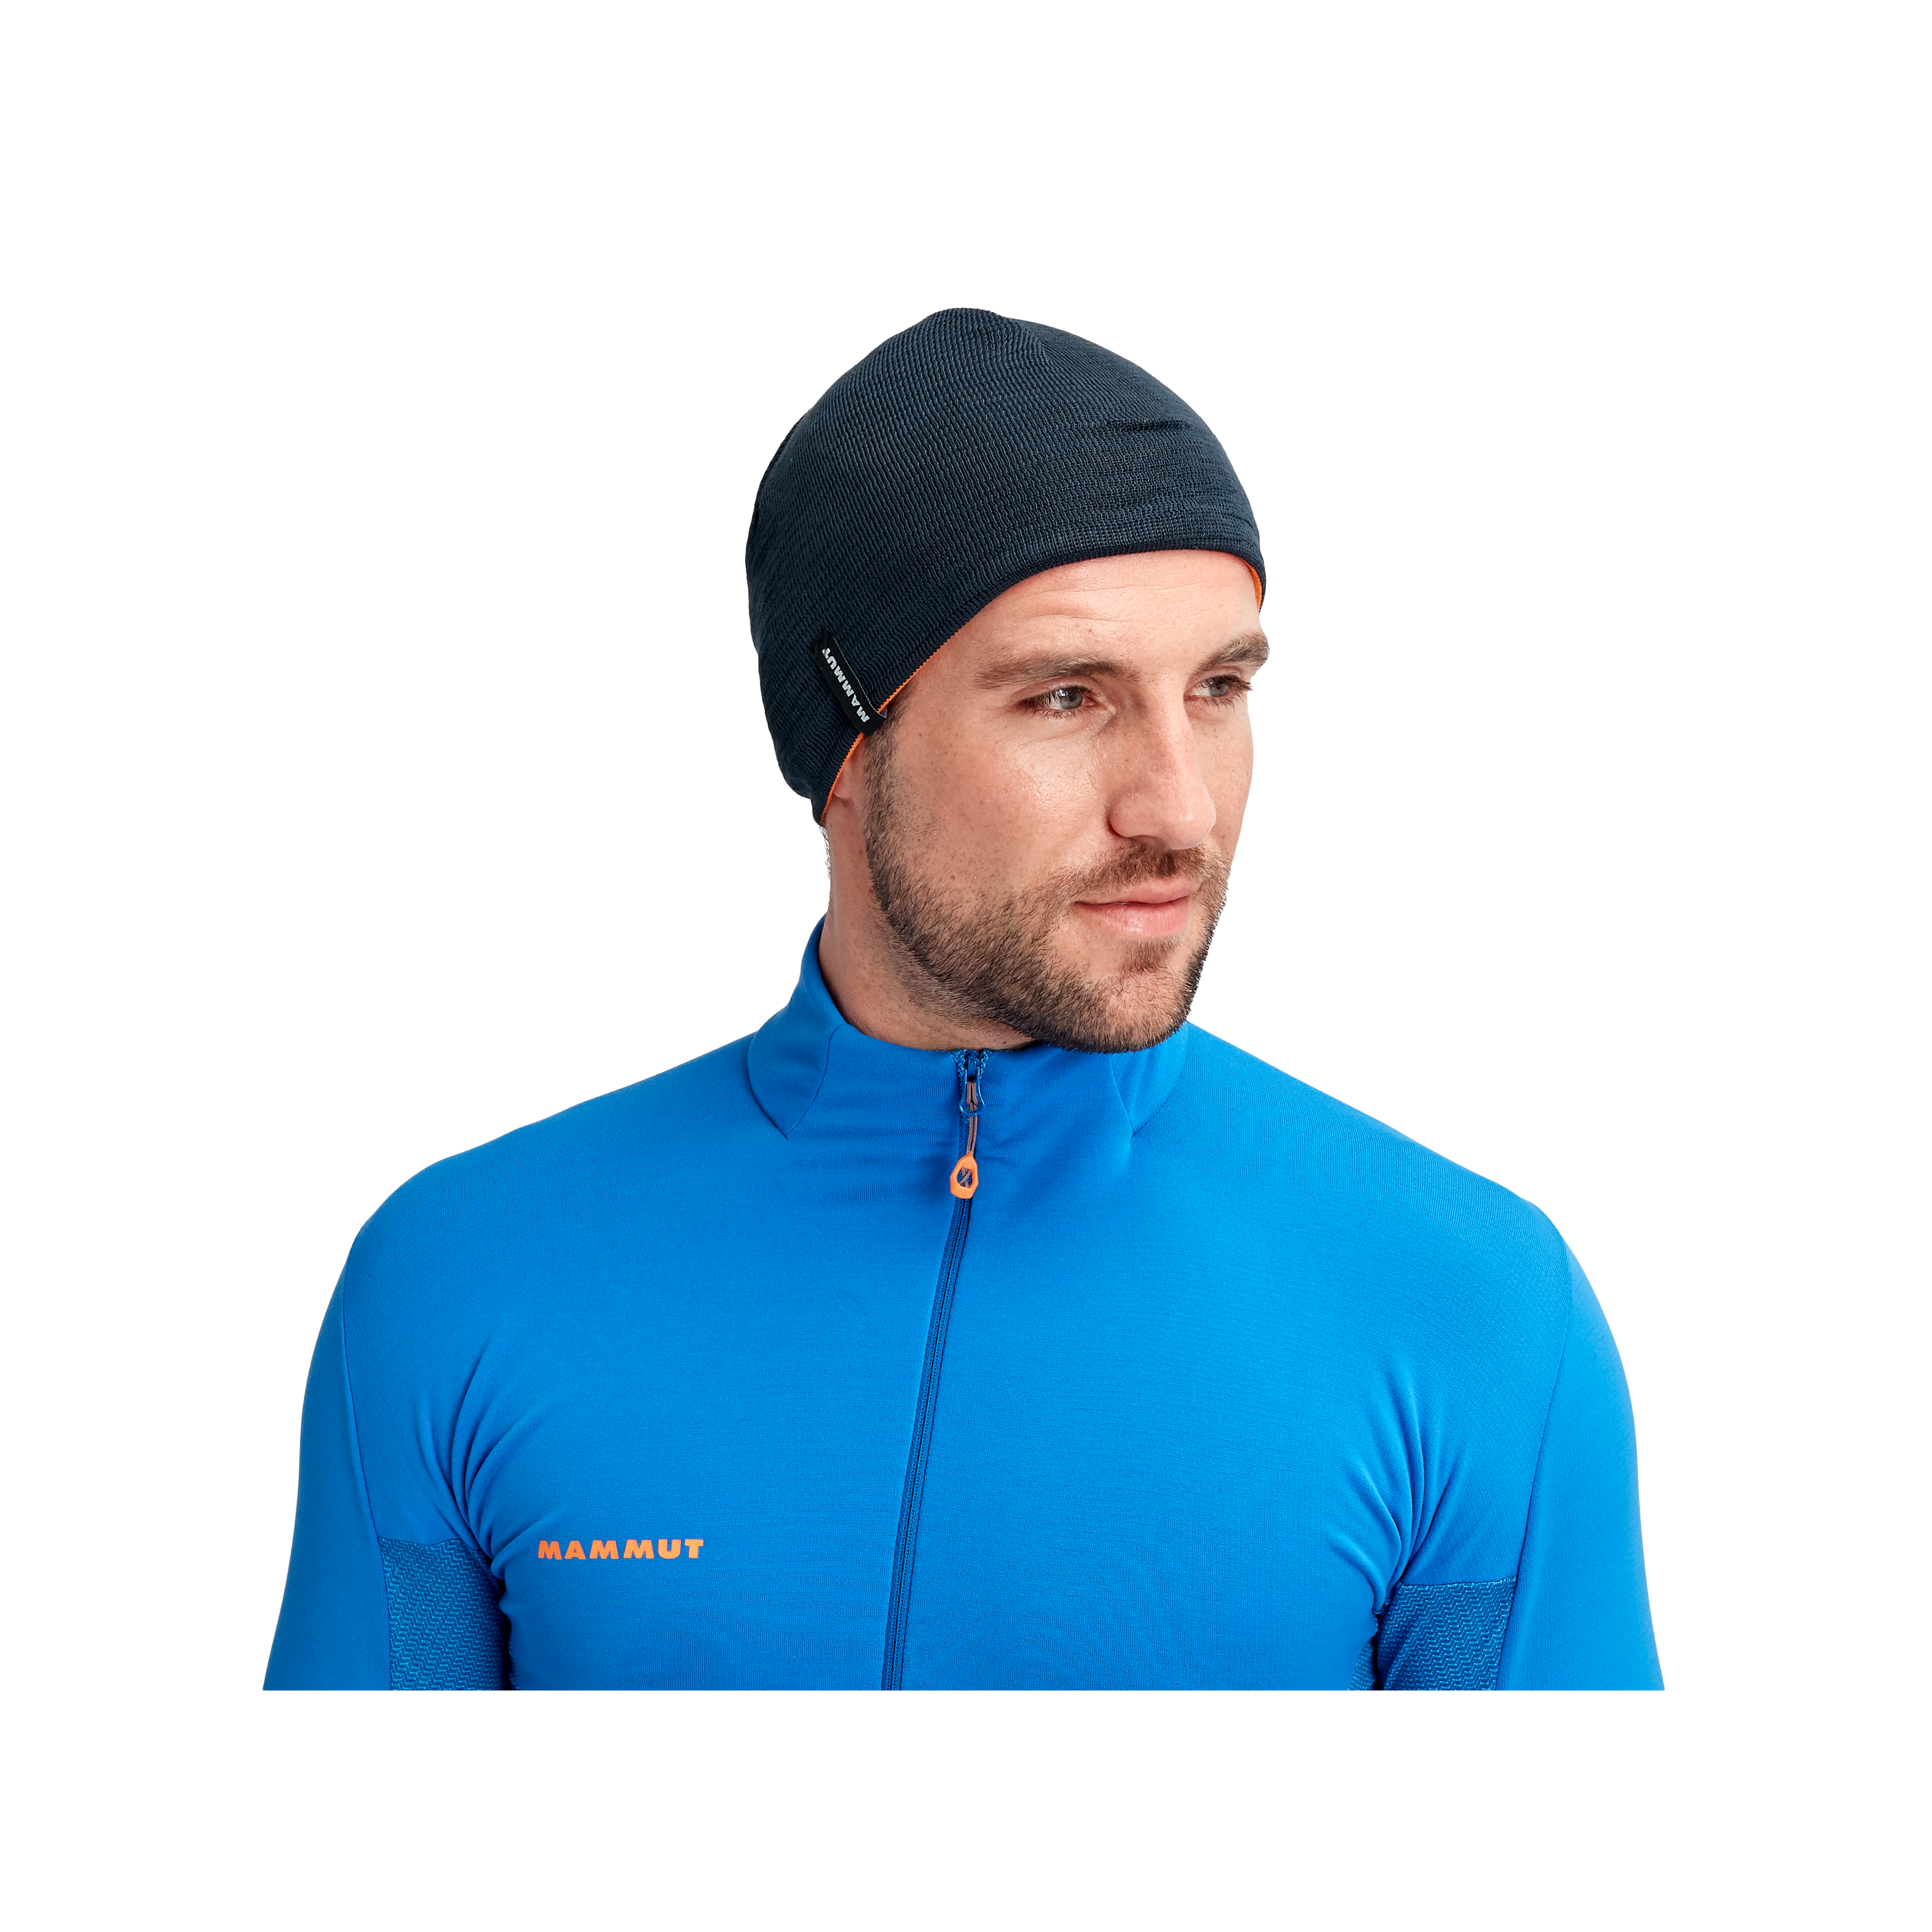 Nordwand Beanie product image